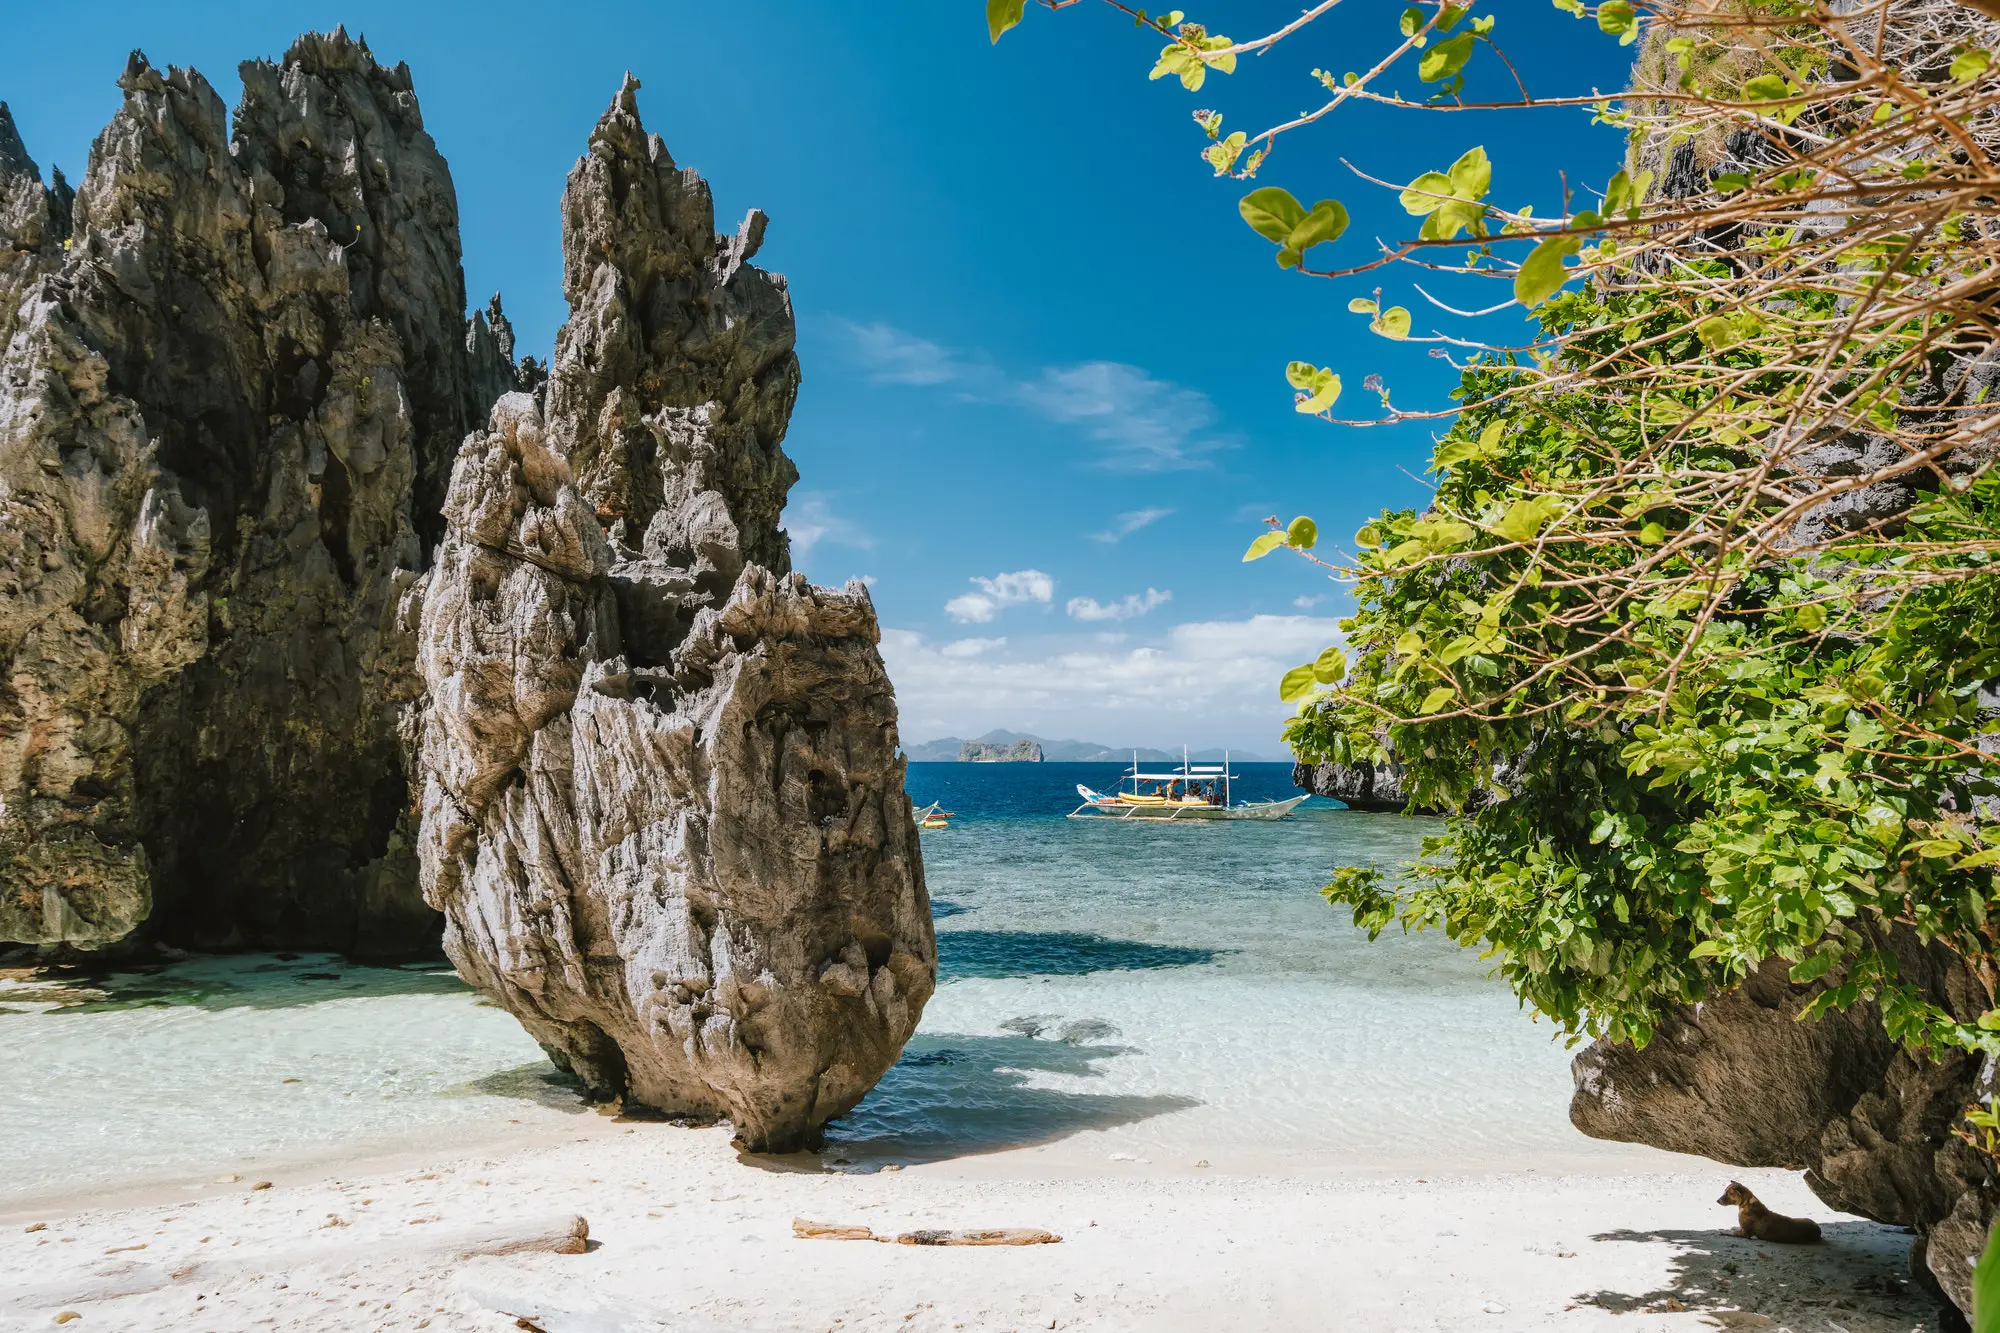 23 Amazing Photos That Makes You Want To Visit El Nido Palawan Philippines 2021 Mindfulness